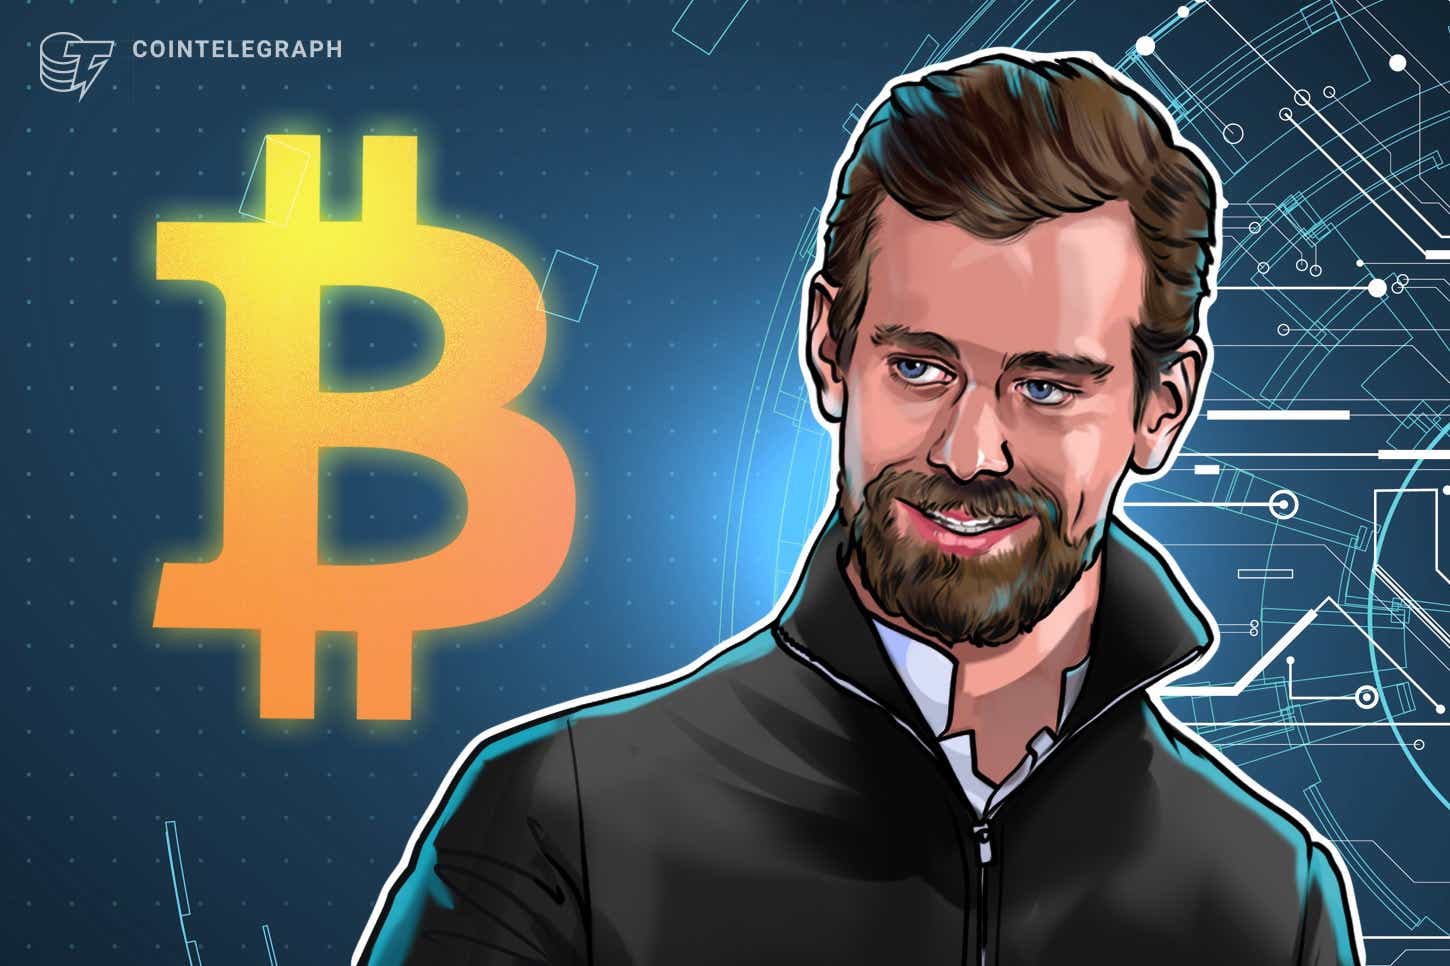 Twitter CEO Jack Dorsey reiterates a positive outlook on Bitcoin tipping during earnings call